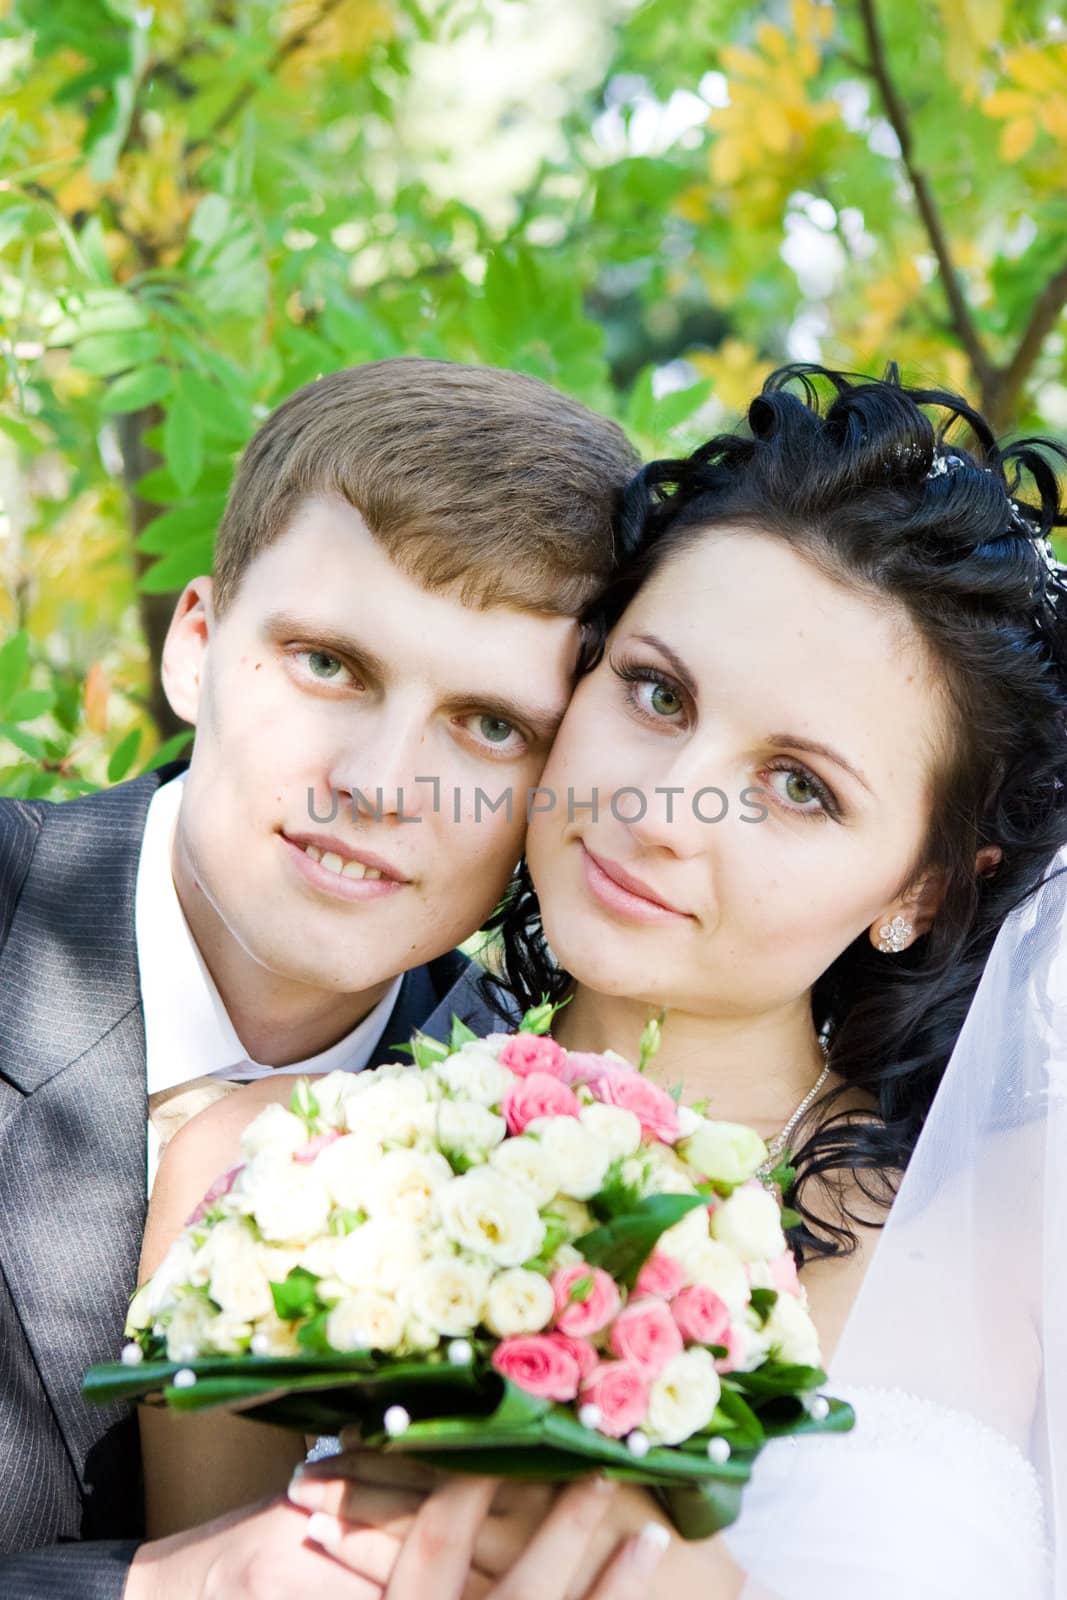 a portrait of the happy bride and groom with a flower bouquet